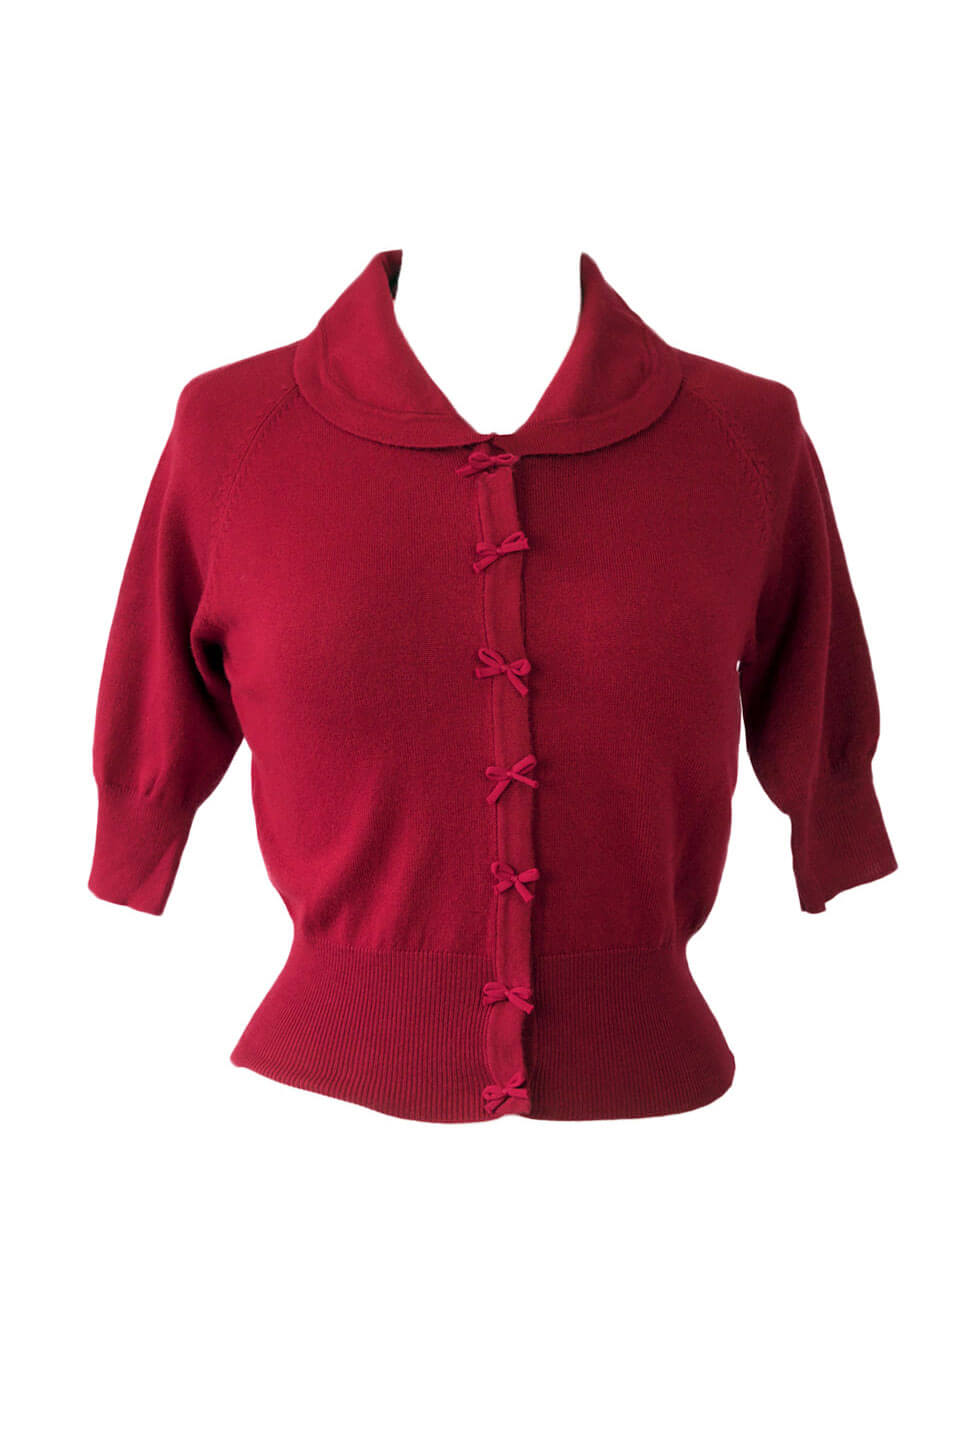 Cropped quarter length dark red cardigan with bow details -1950s style | Weekend Doll